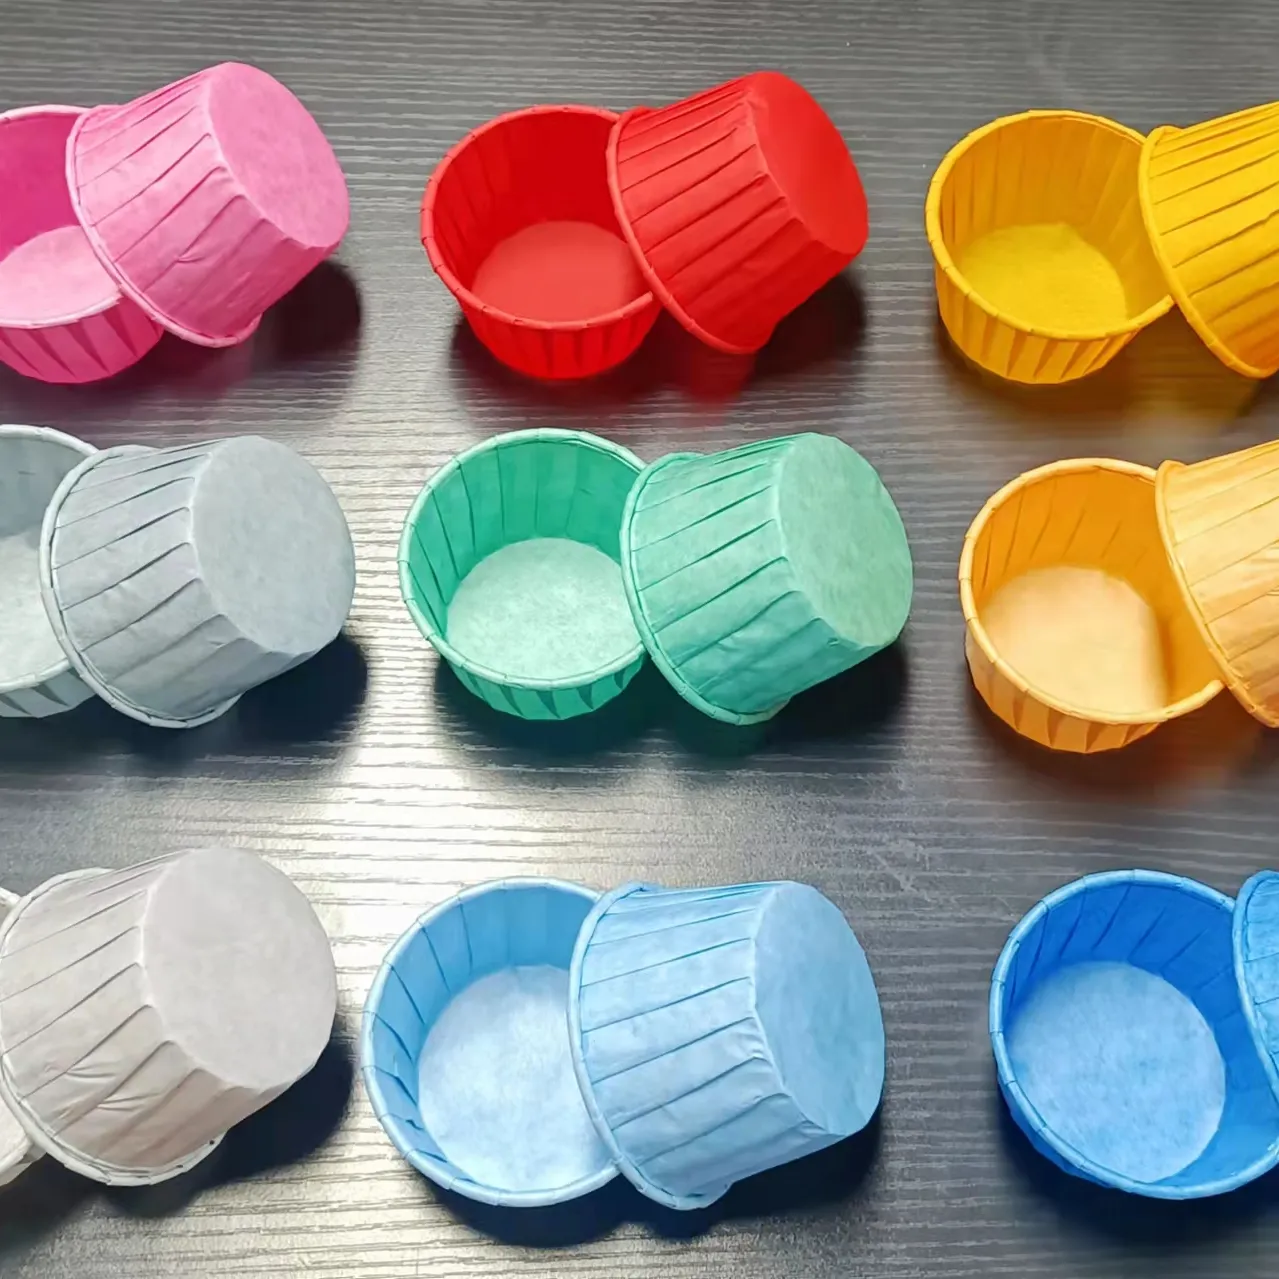 5*4cm 100pcs/bottle pure color Disposable Printed Paper Cupcake Rolled Rim Cake Cup Liners Paper Cupcake For Baking